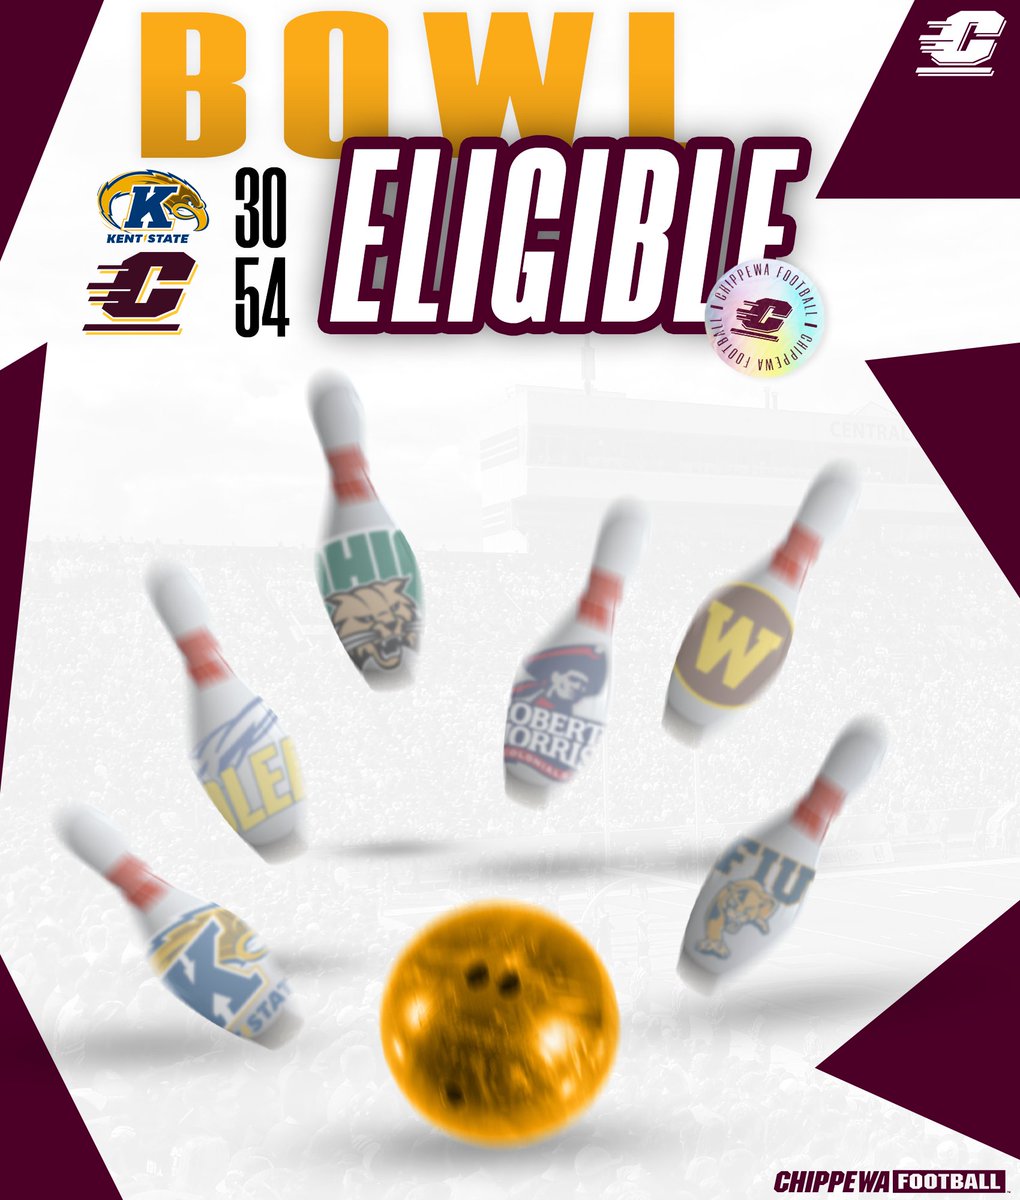 Last night's win made CMU bowl eligible for the 12th time in the last 15 regular seasons including eight of the last nine years. #FireUpChips 🔥⬆️ 🏈